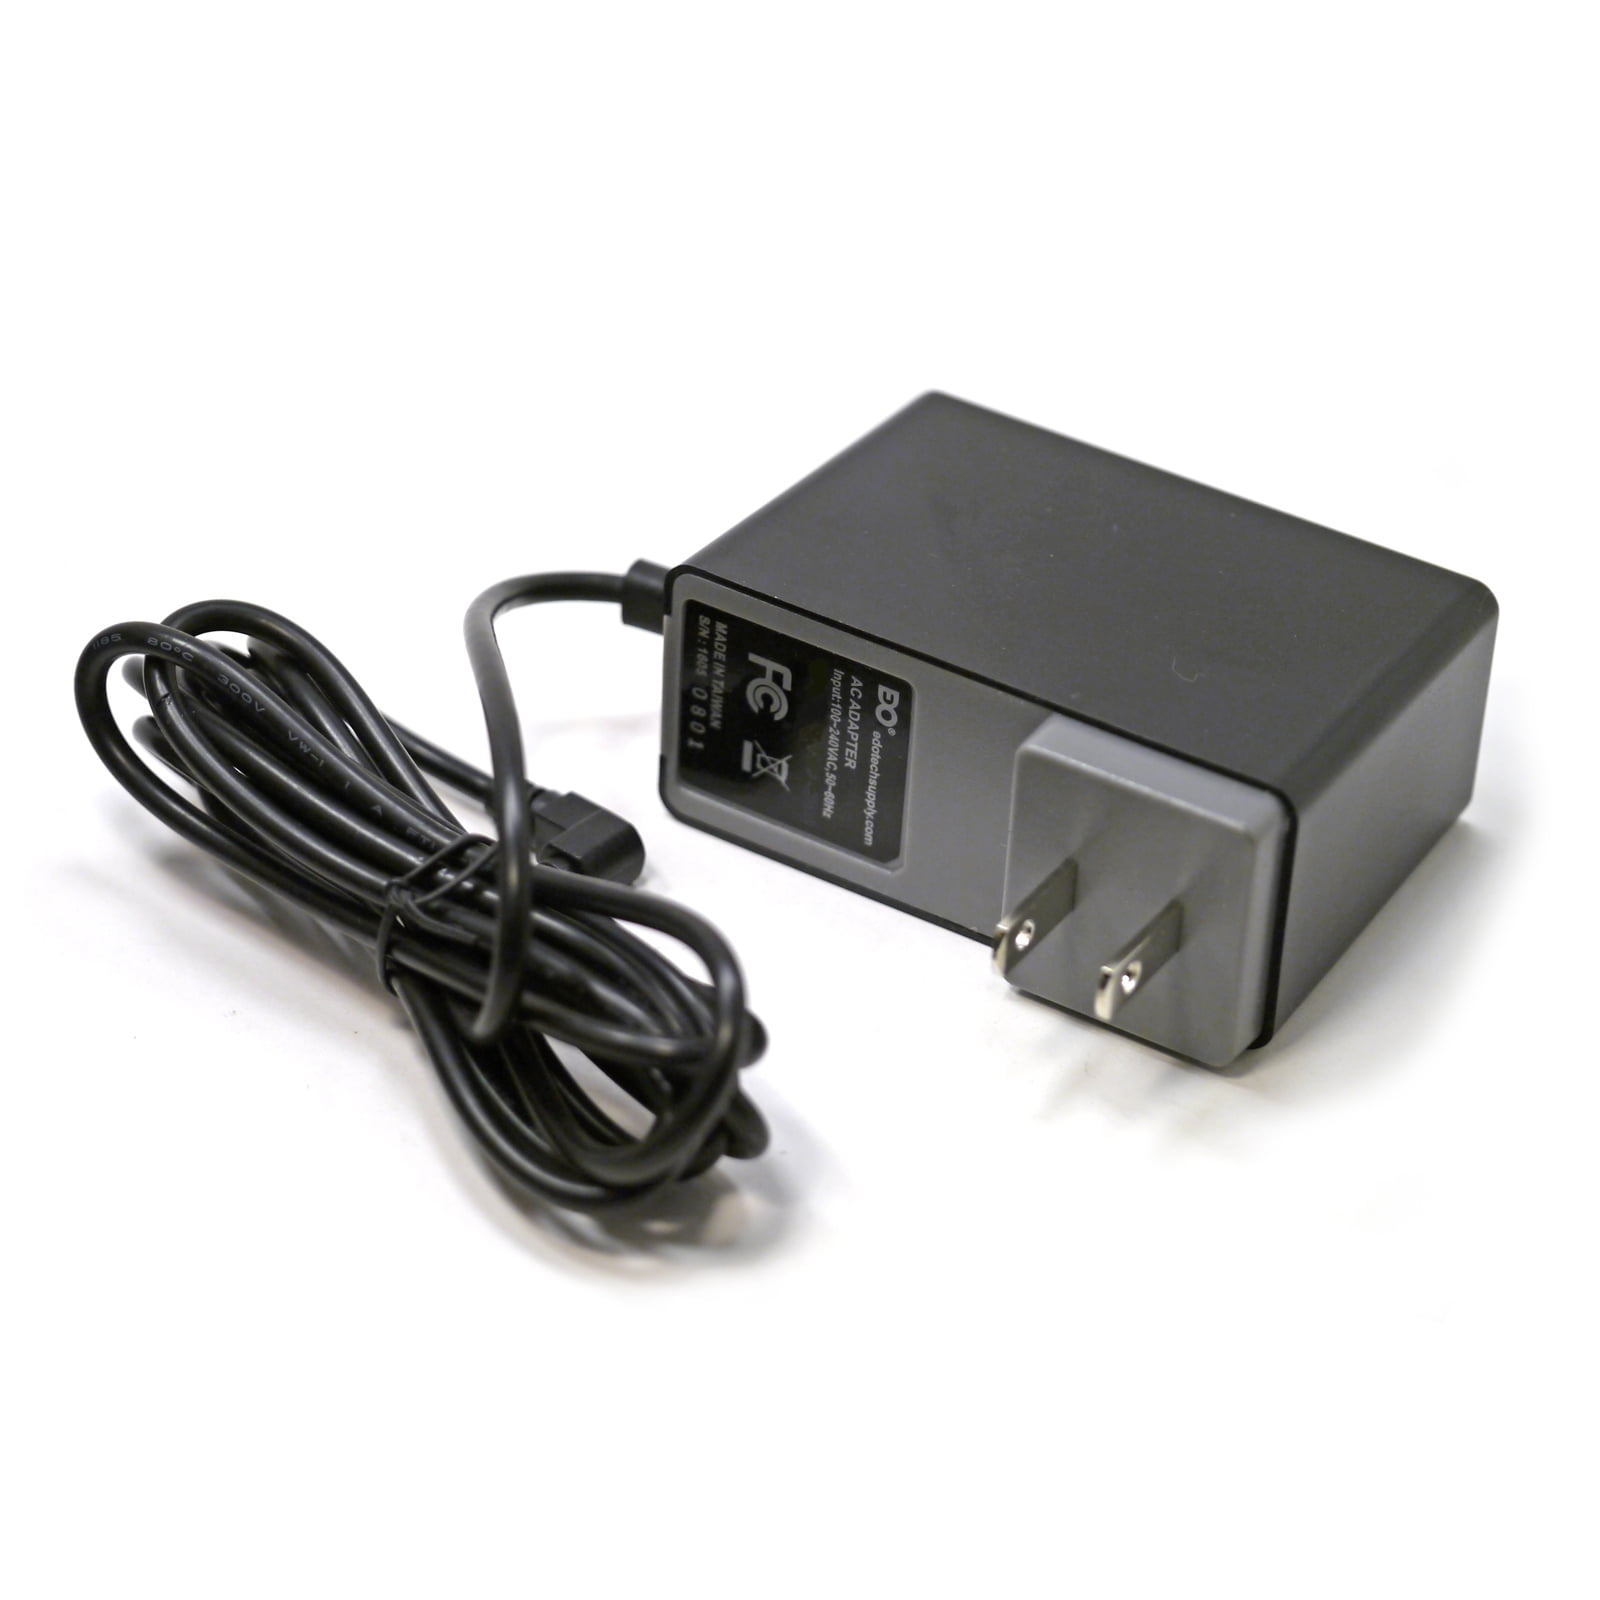 Any Gateway Laptop Charger / Power Adapter